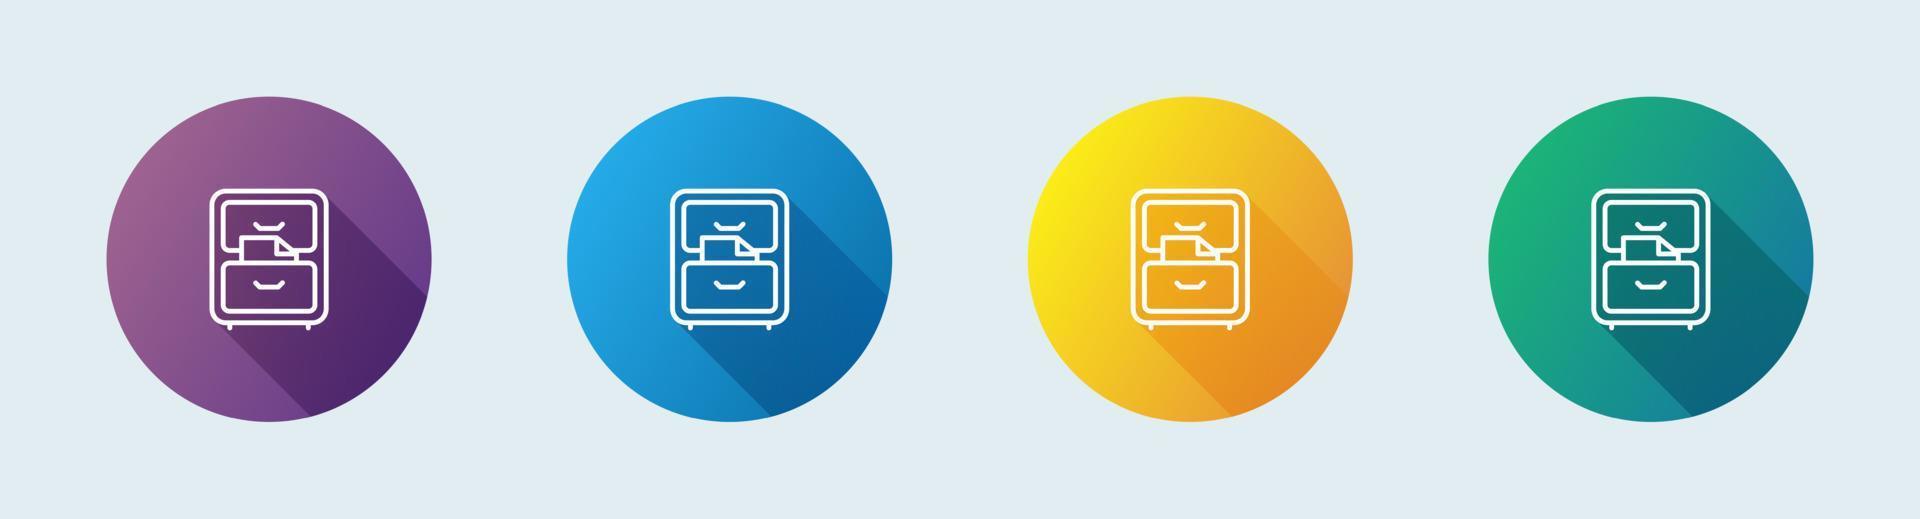 File cabinet line icon in flat design style. Archive signs vector illustration.